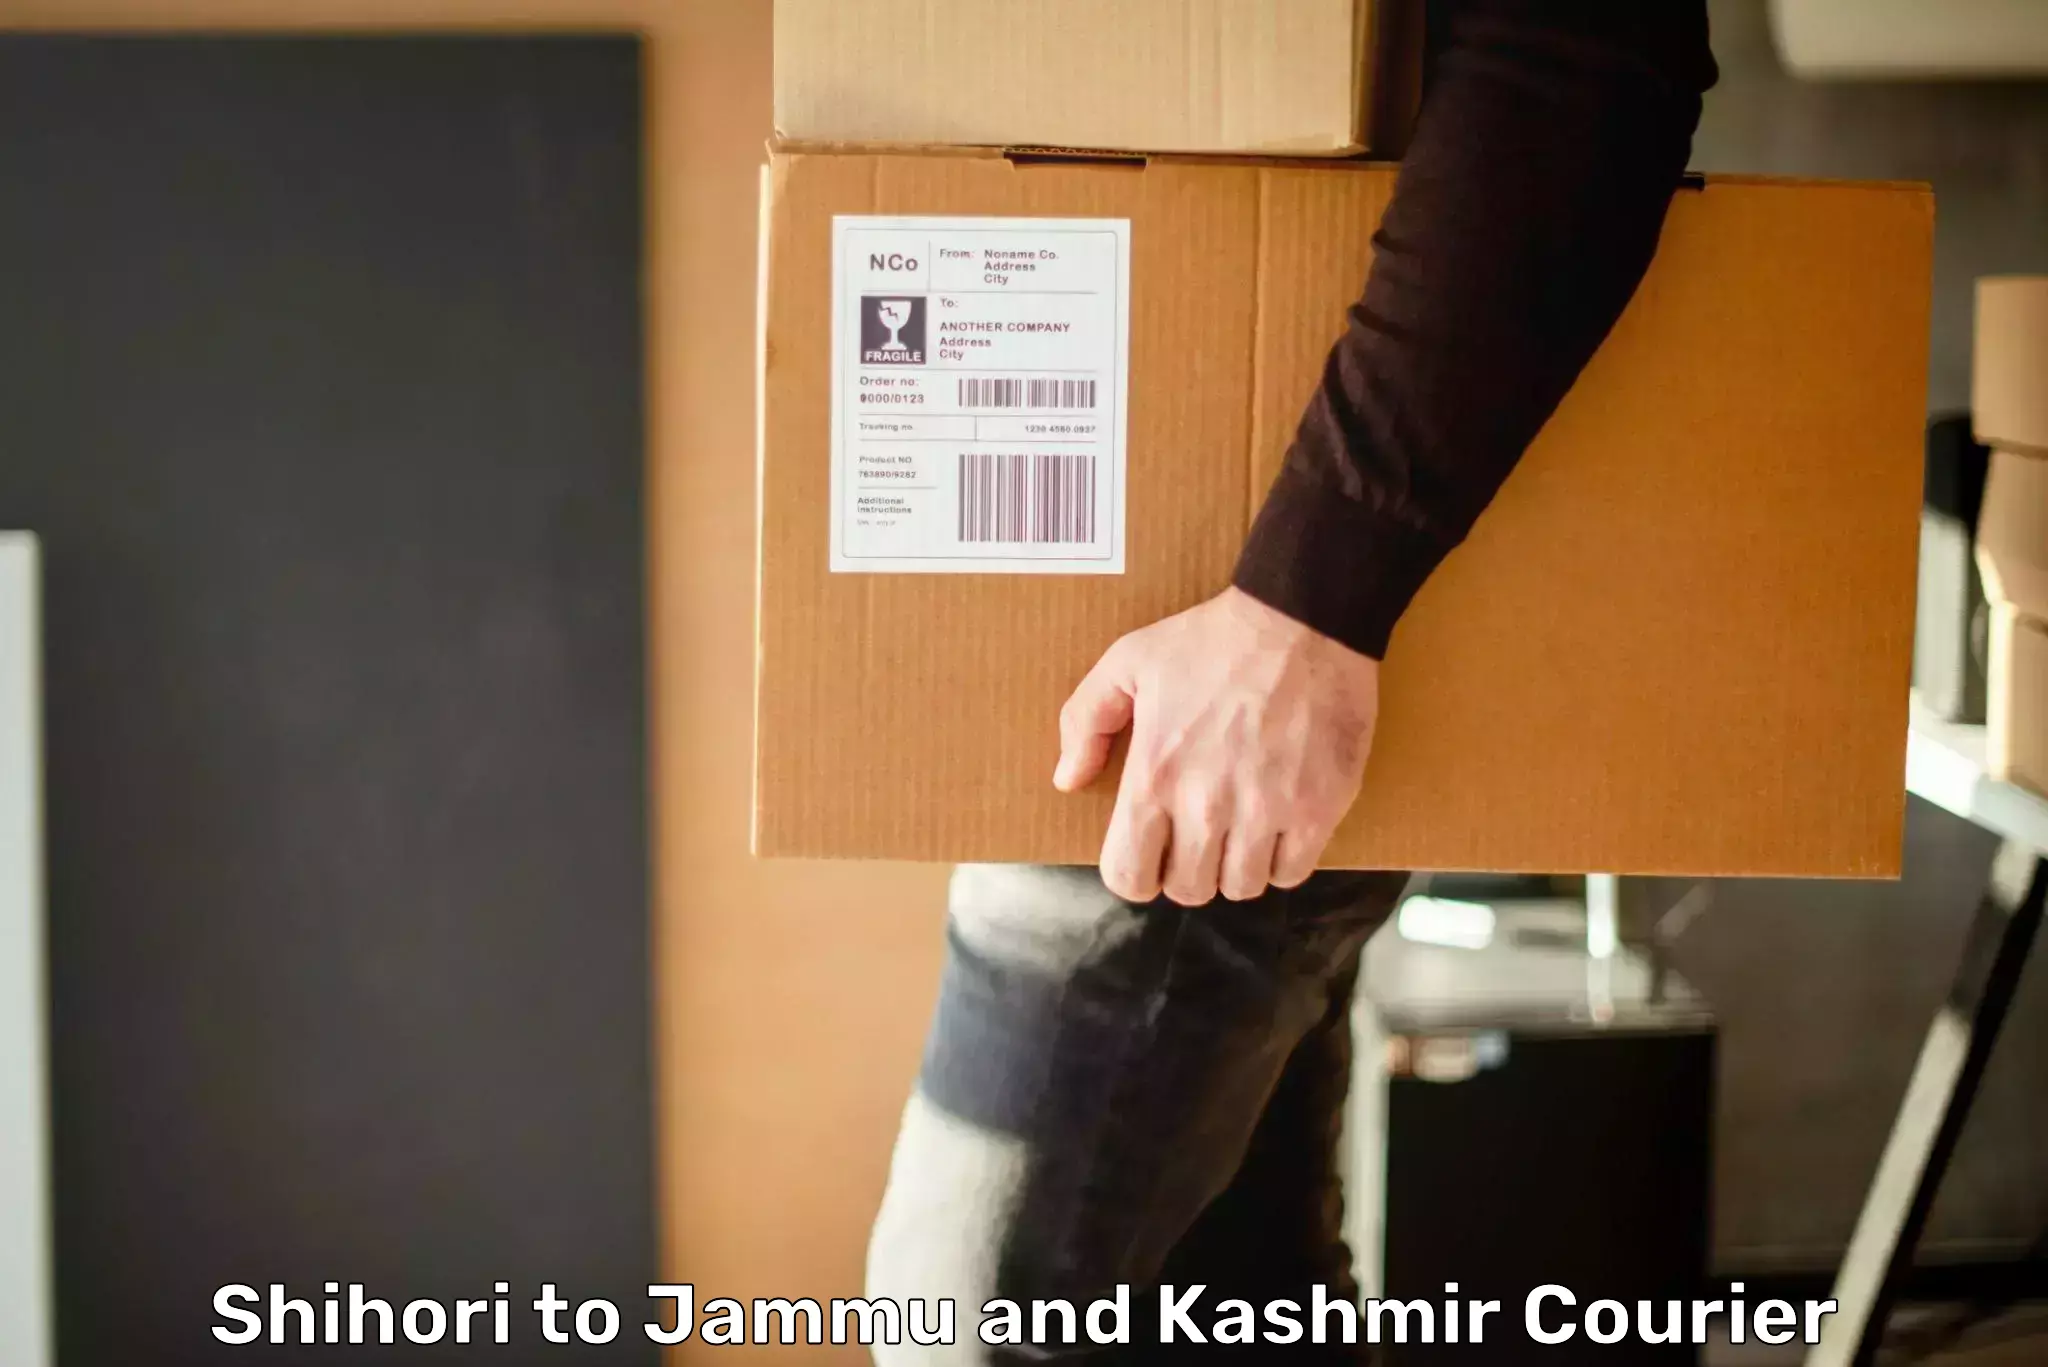 Overnight delivery services Shihori to Jammu